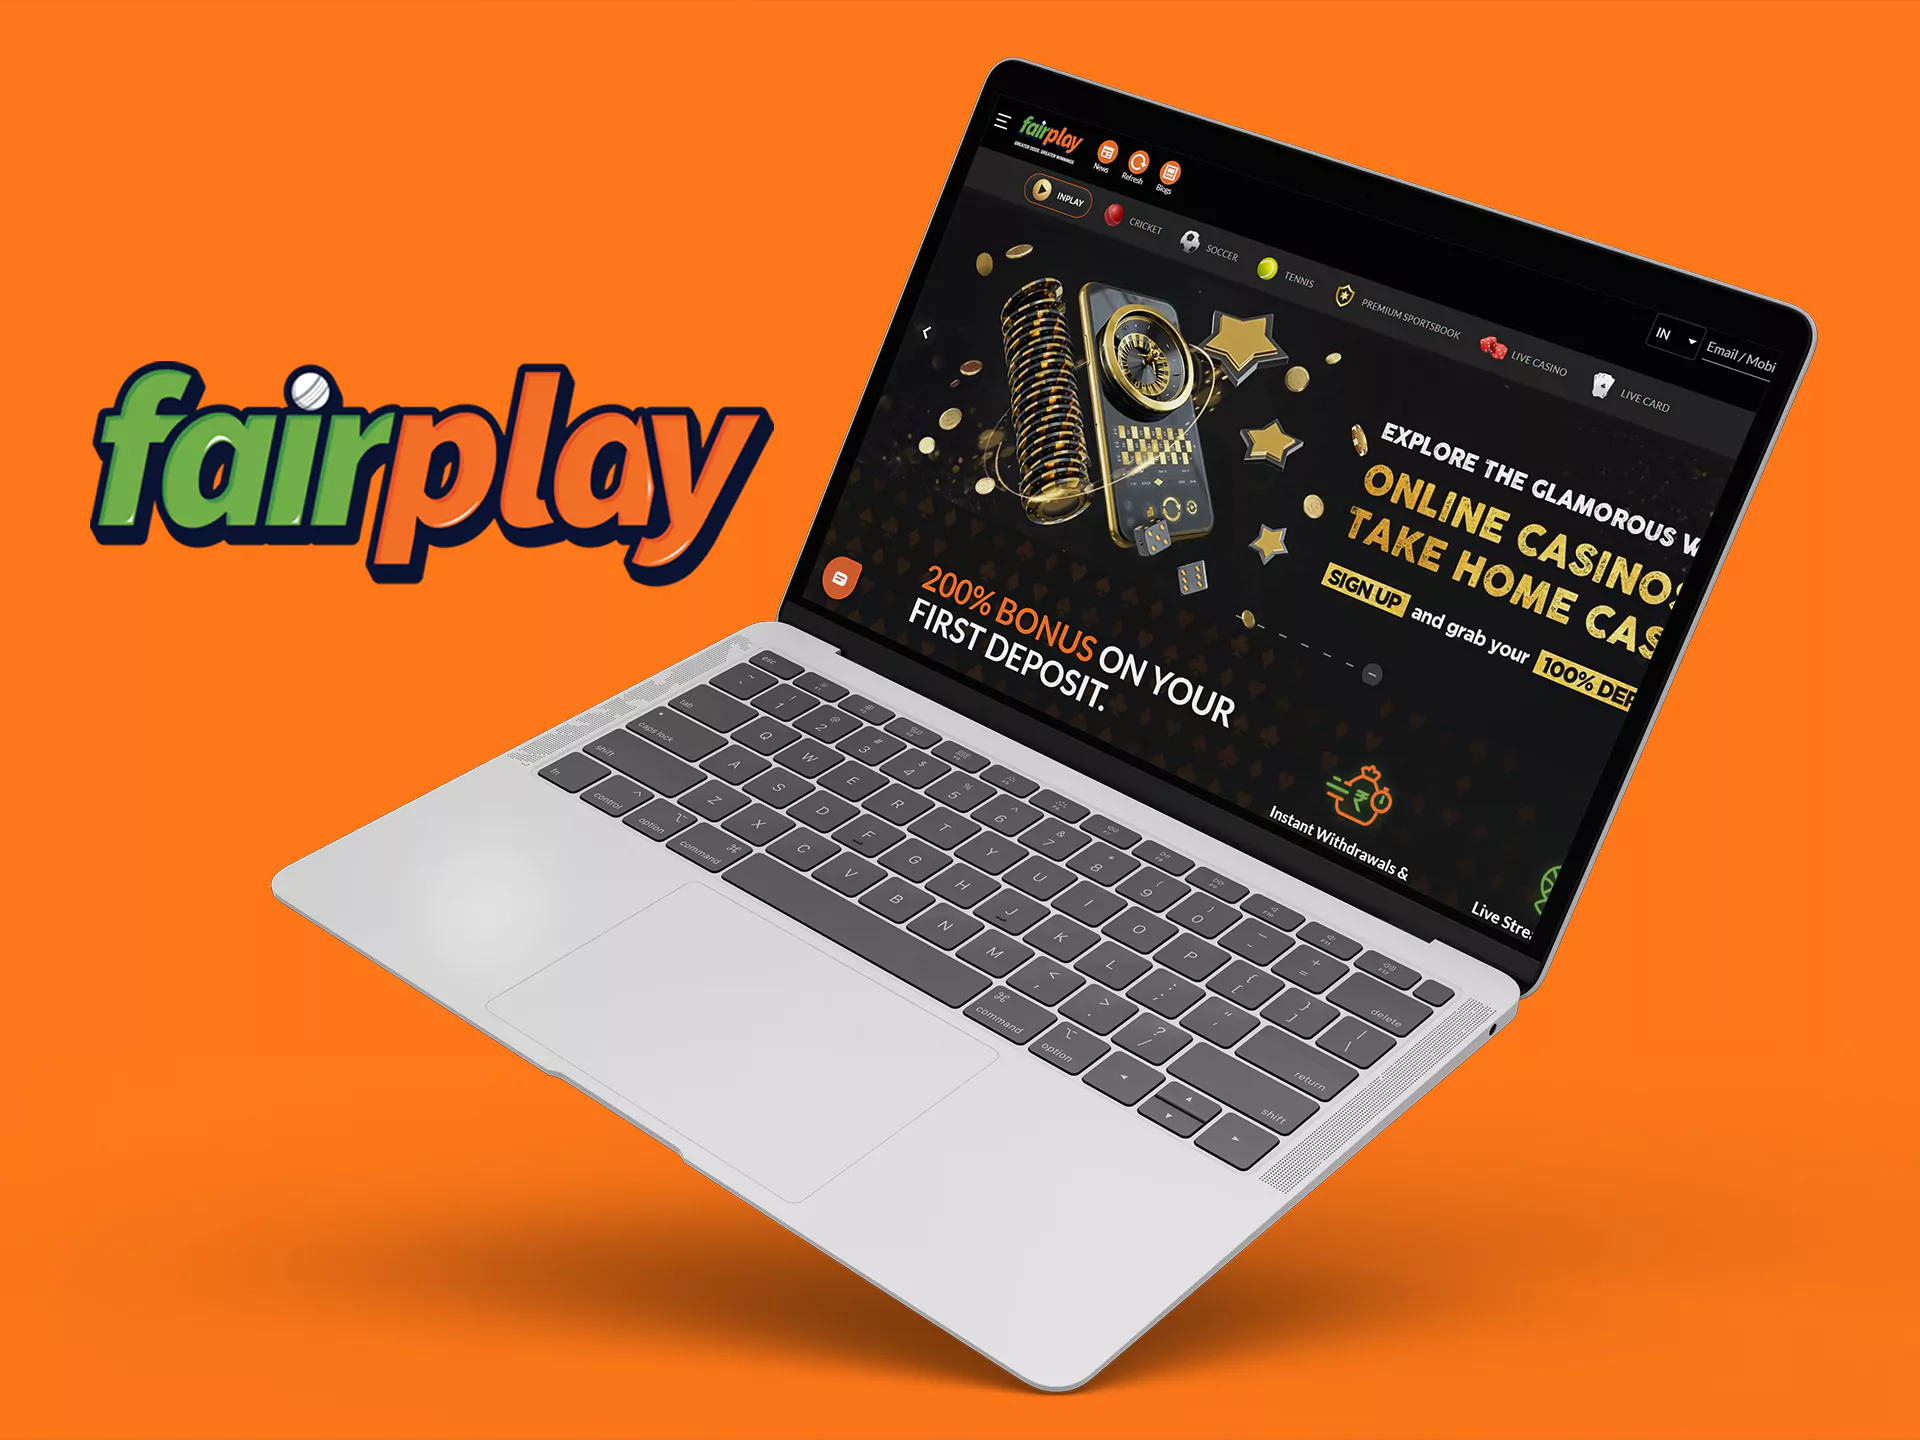 Fairplay India has a official website.